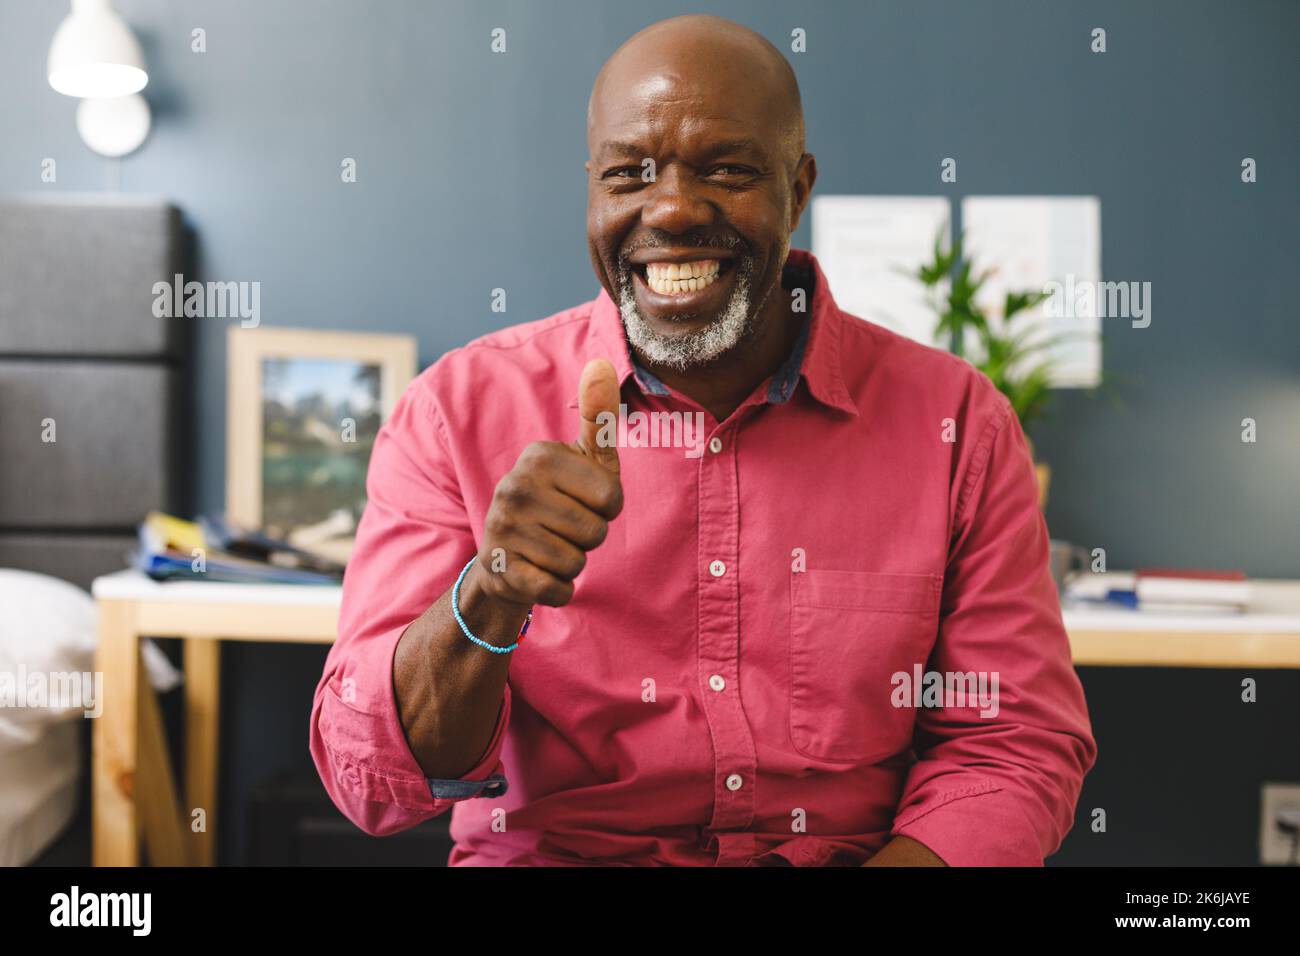 Happy african american senior man making video call smiling and giving thumb up sign to camera Stock Photo